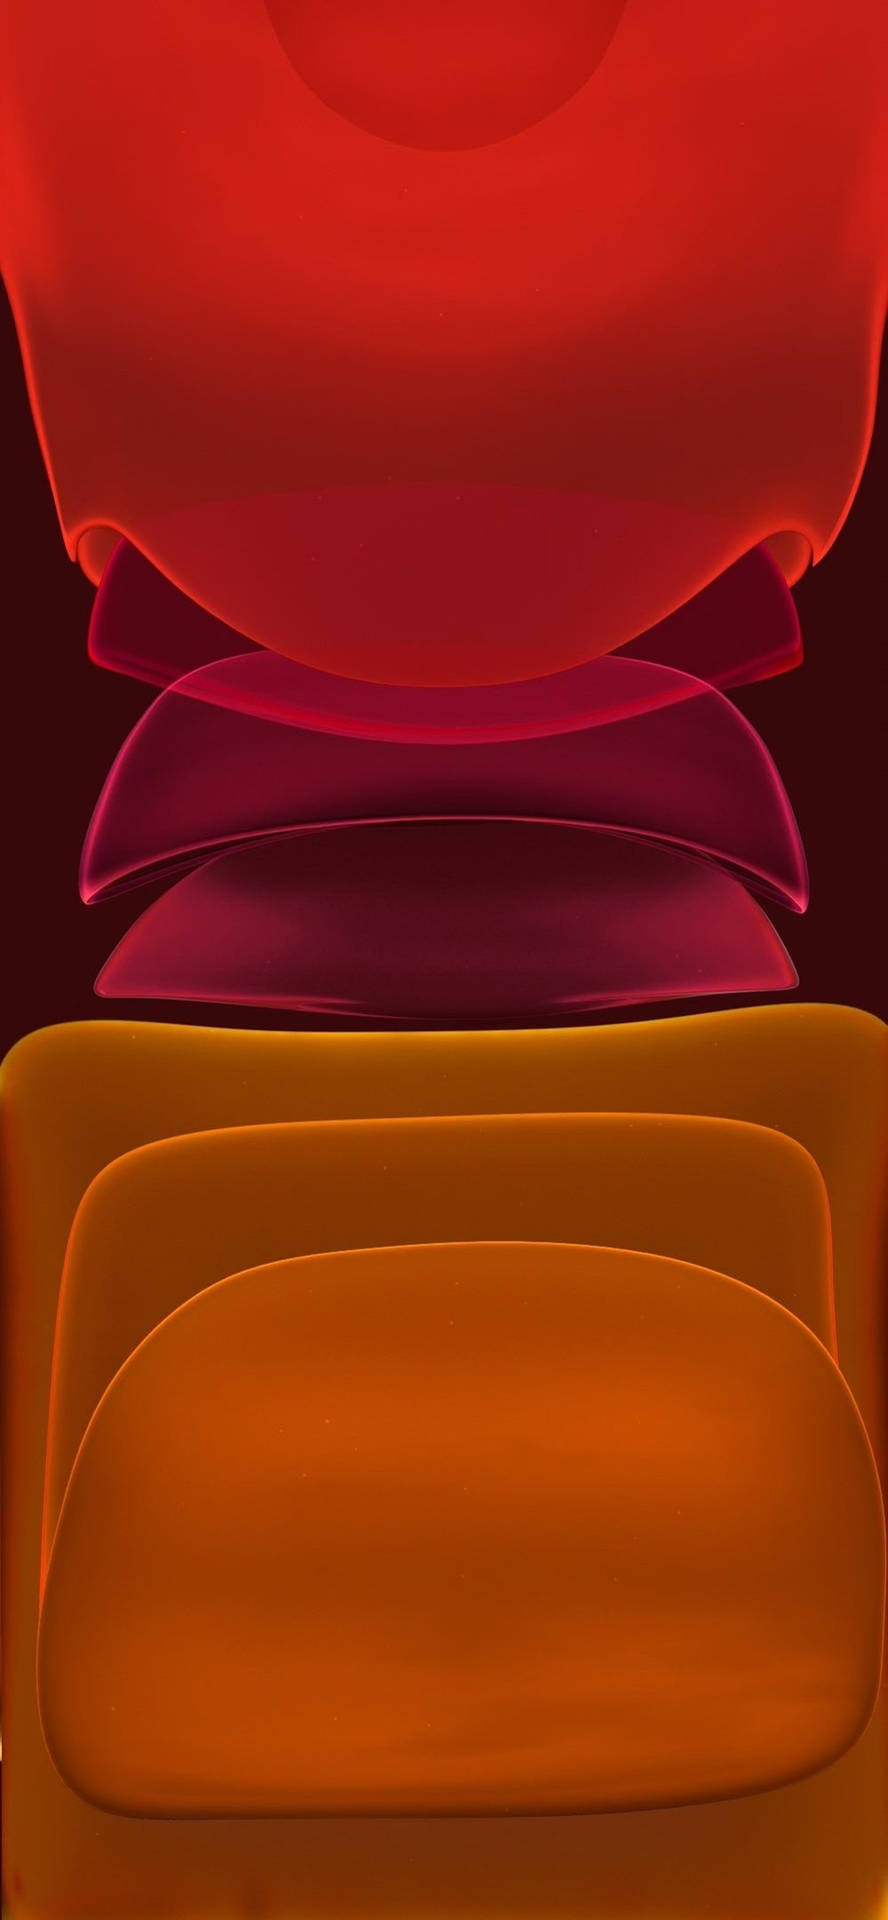 Cool iPhone 11 Orange And Red Blobs Wallpaper